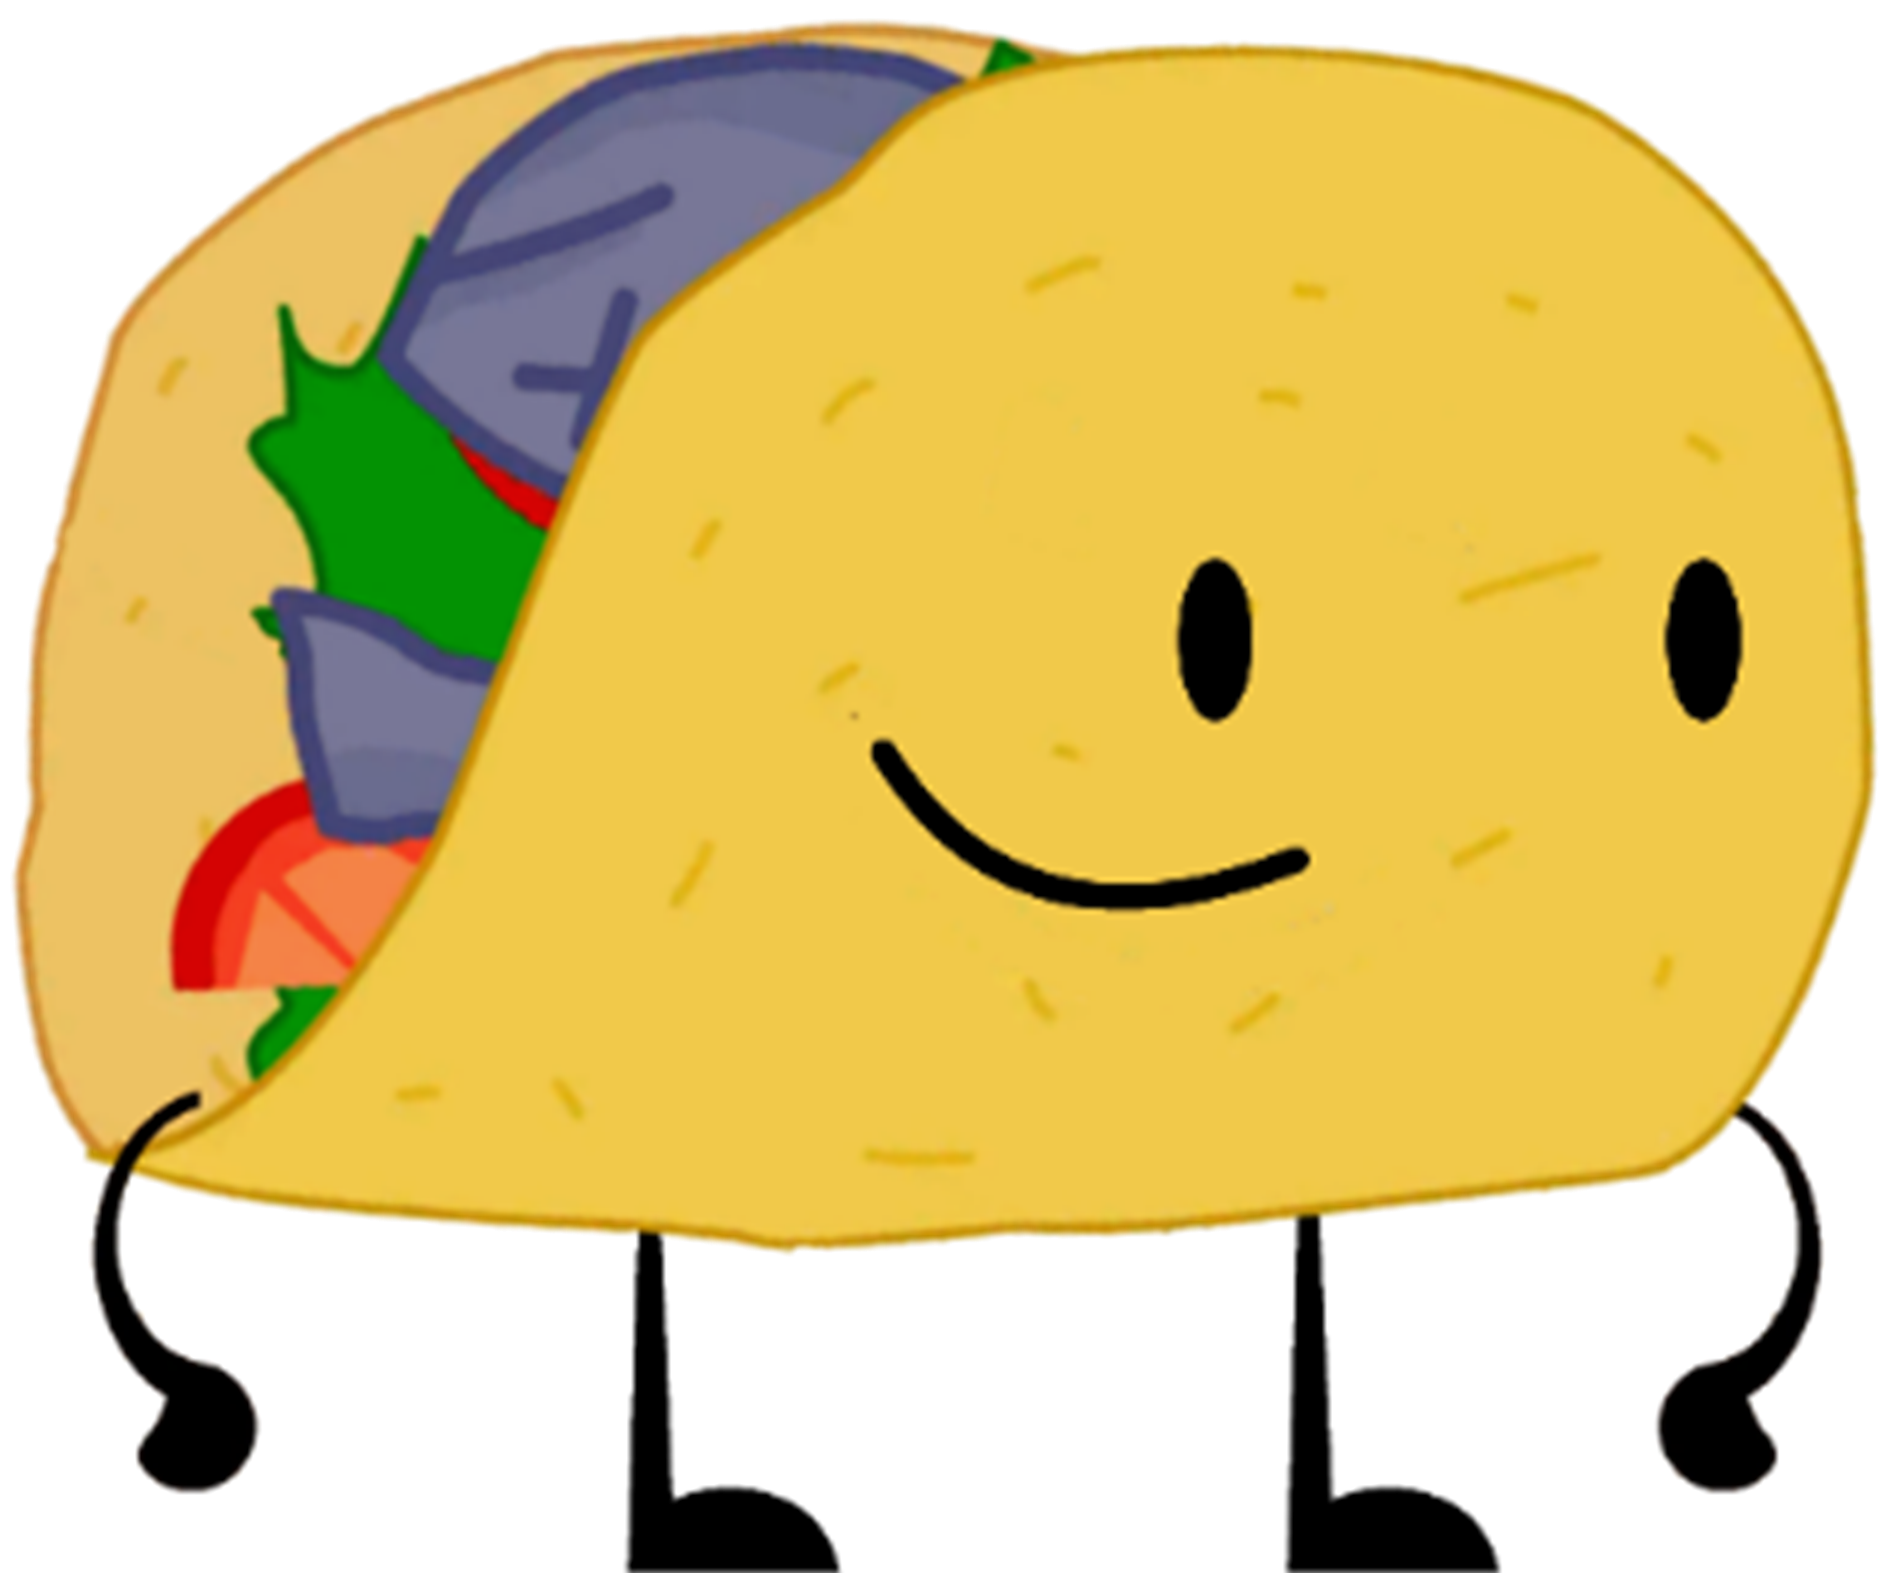 Tacos clipart file. Image taco png object